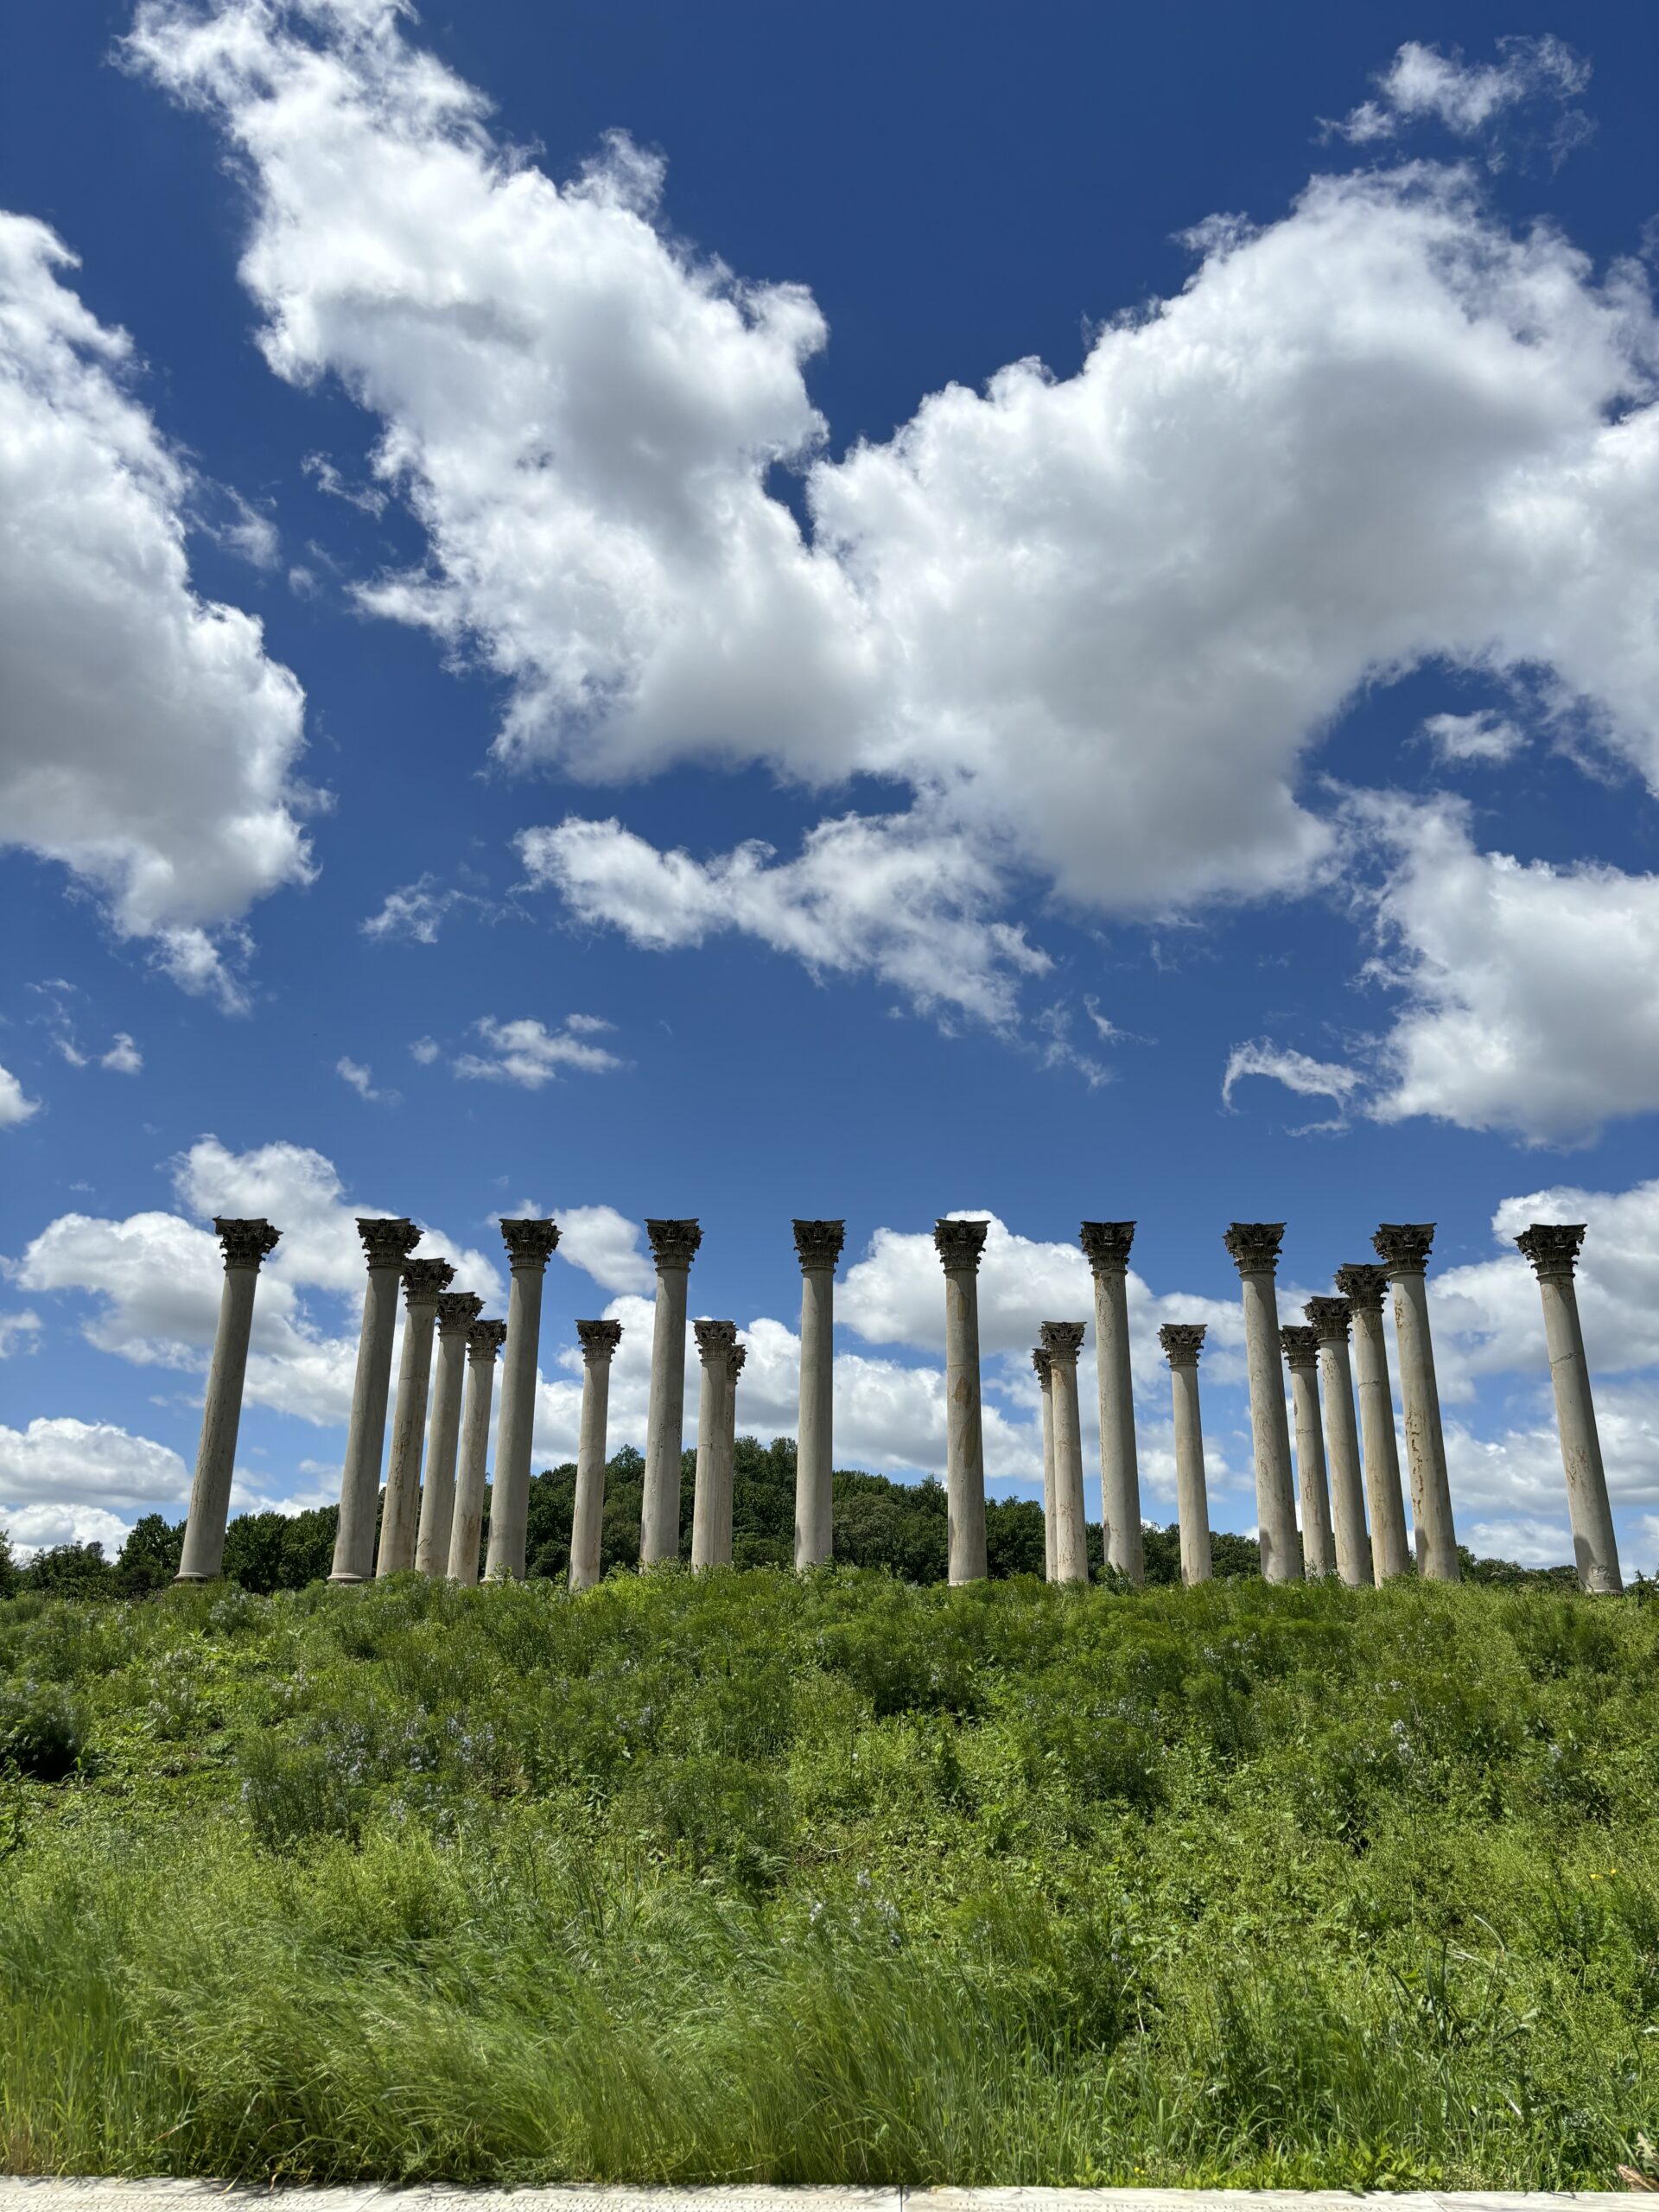 the DC National Columns on top of a grassy hill. There's about 4 rows of 10 columns